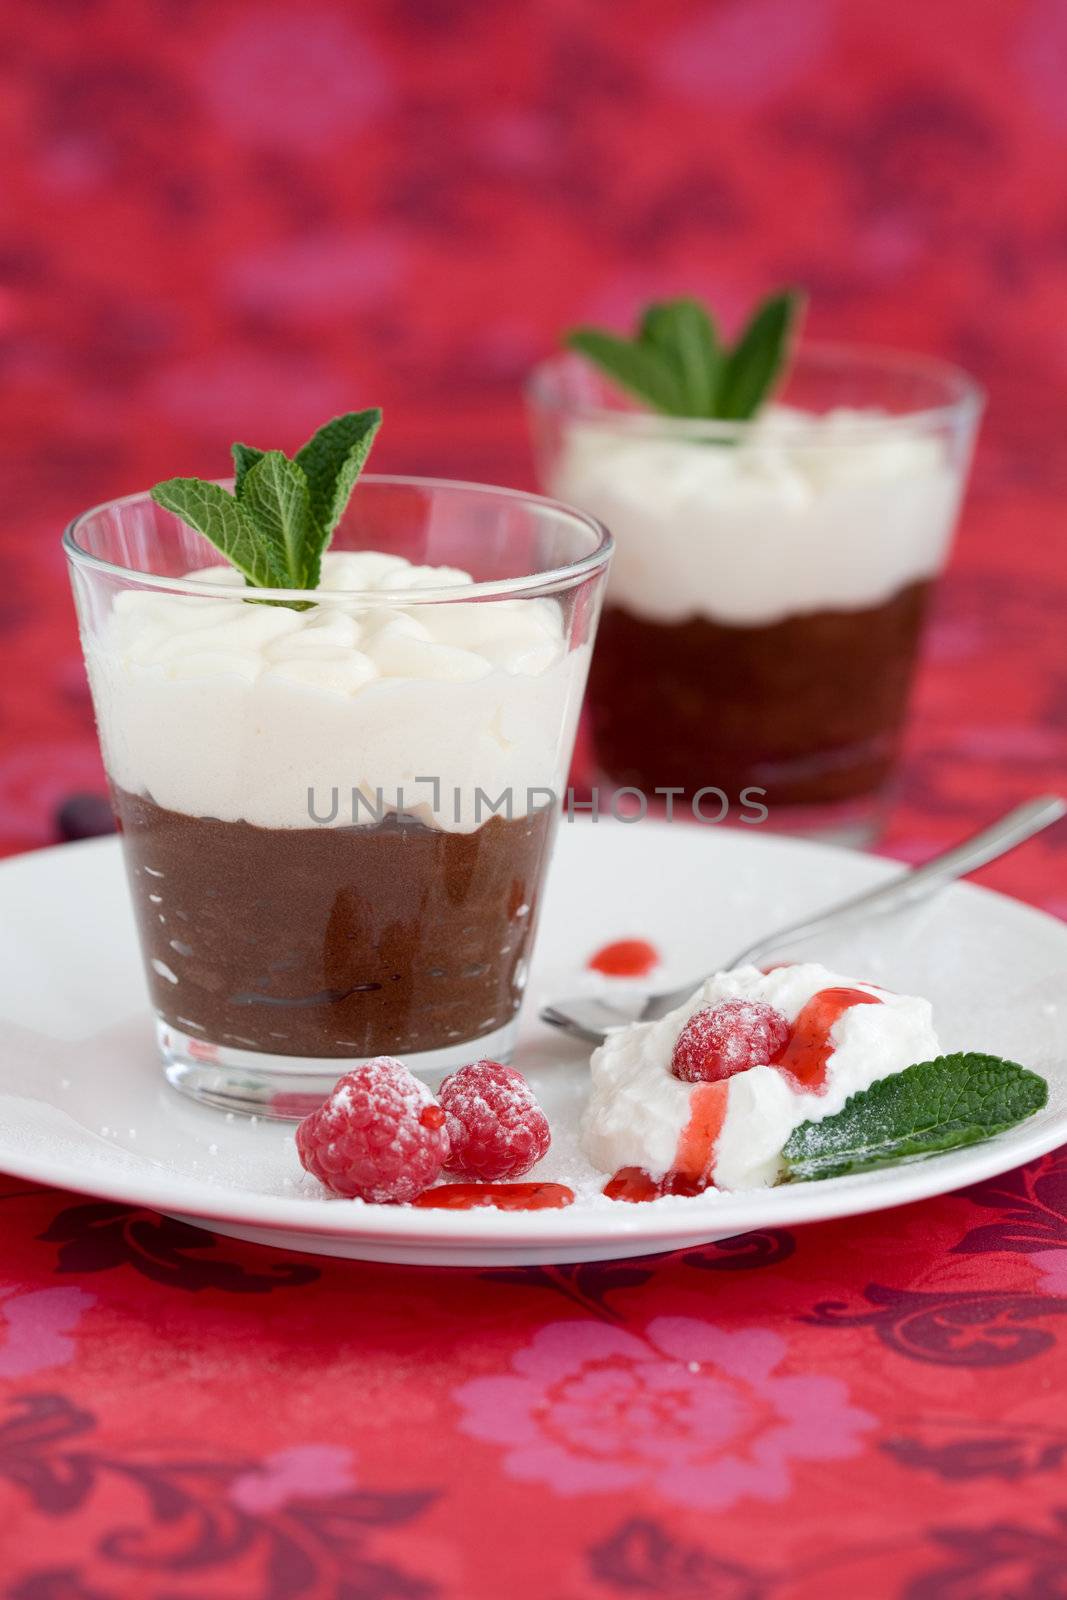 Delicious chocolate dessert served on a plate with raspberries and whipped cream